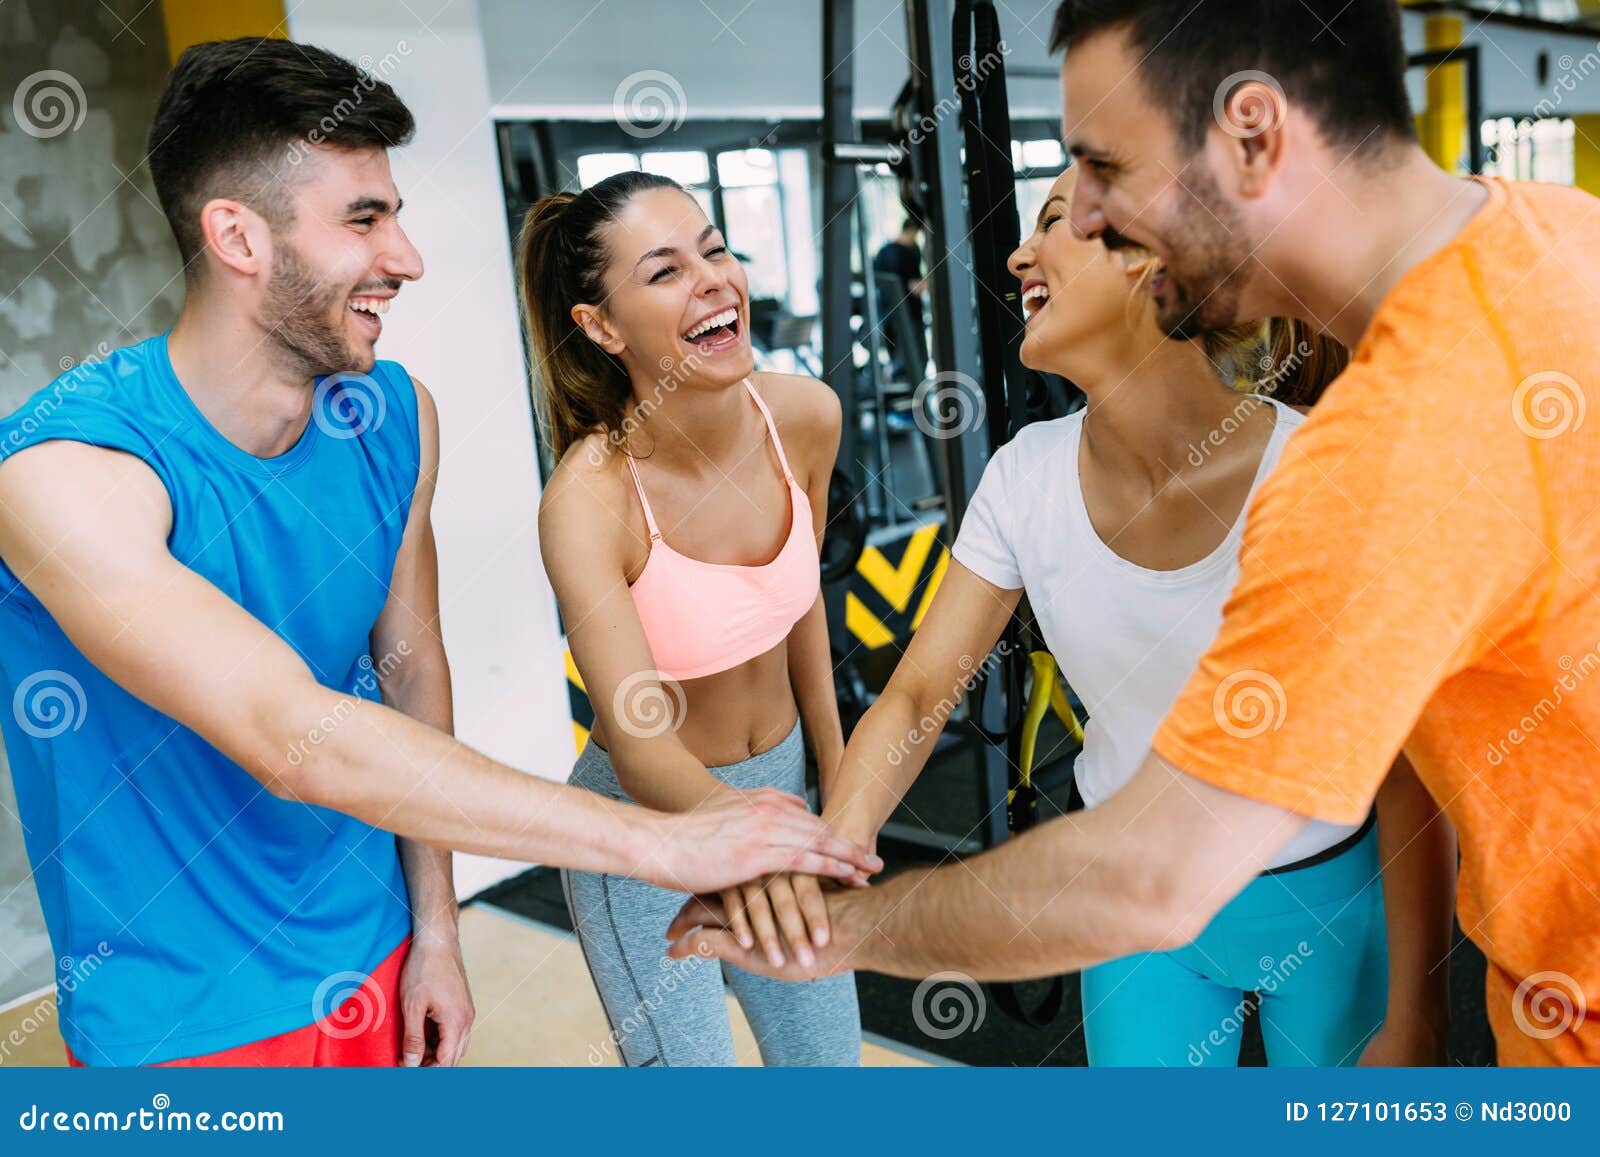 Smiling Men and Women Doing High Five in Gym Stock Image - Image of ...